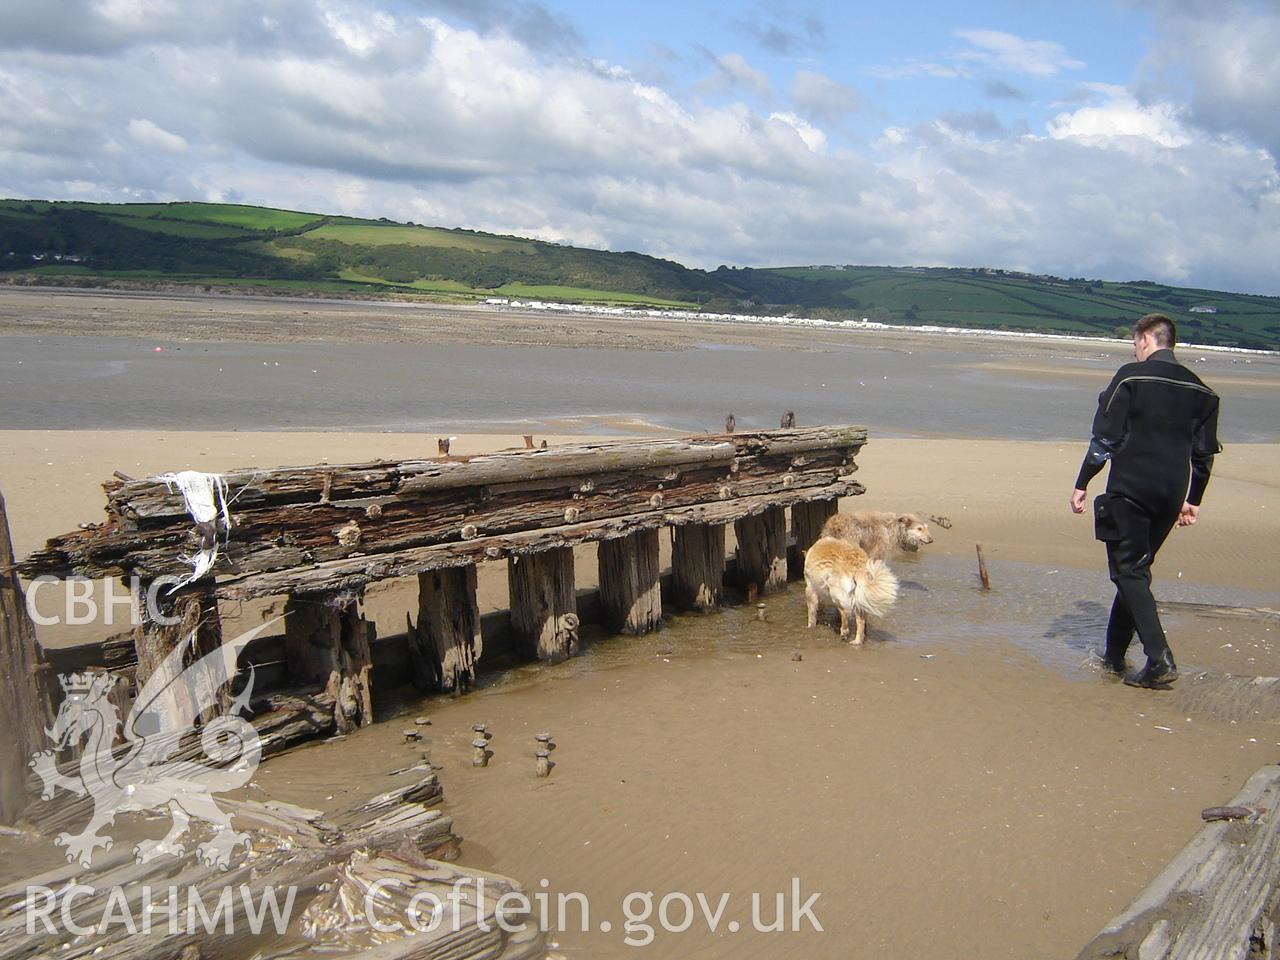 Digital photograph showing the wreck of the Paul at Cefn Sidan, produced by Ian Cundy, August 2012.